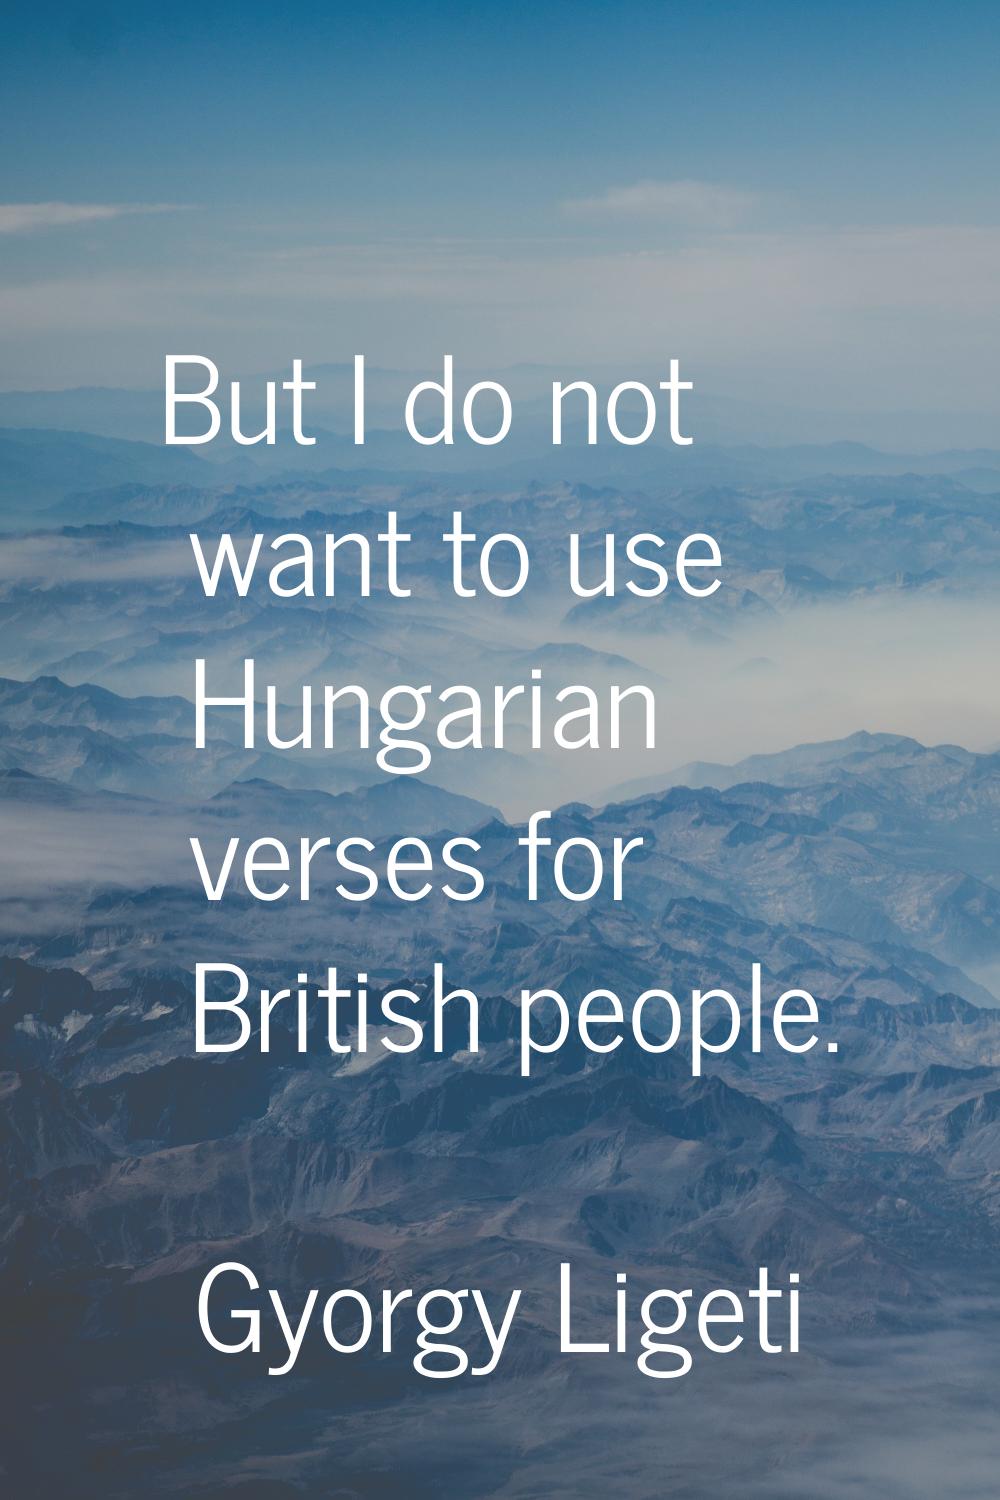 But I do not want to use Hungarian verses for British people.